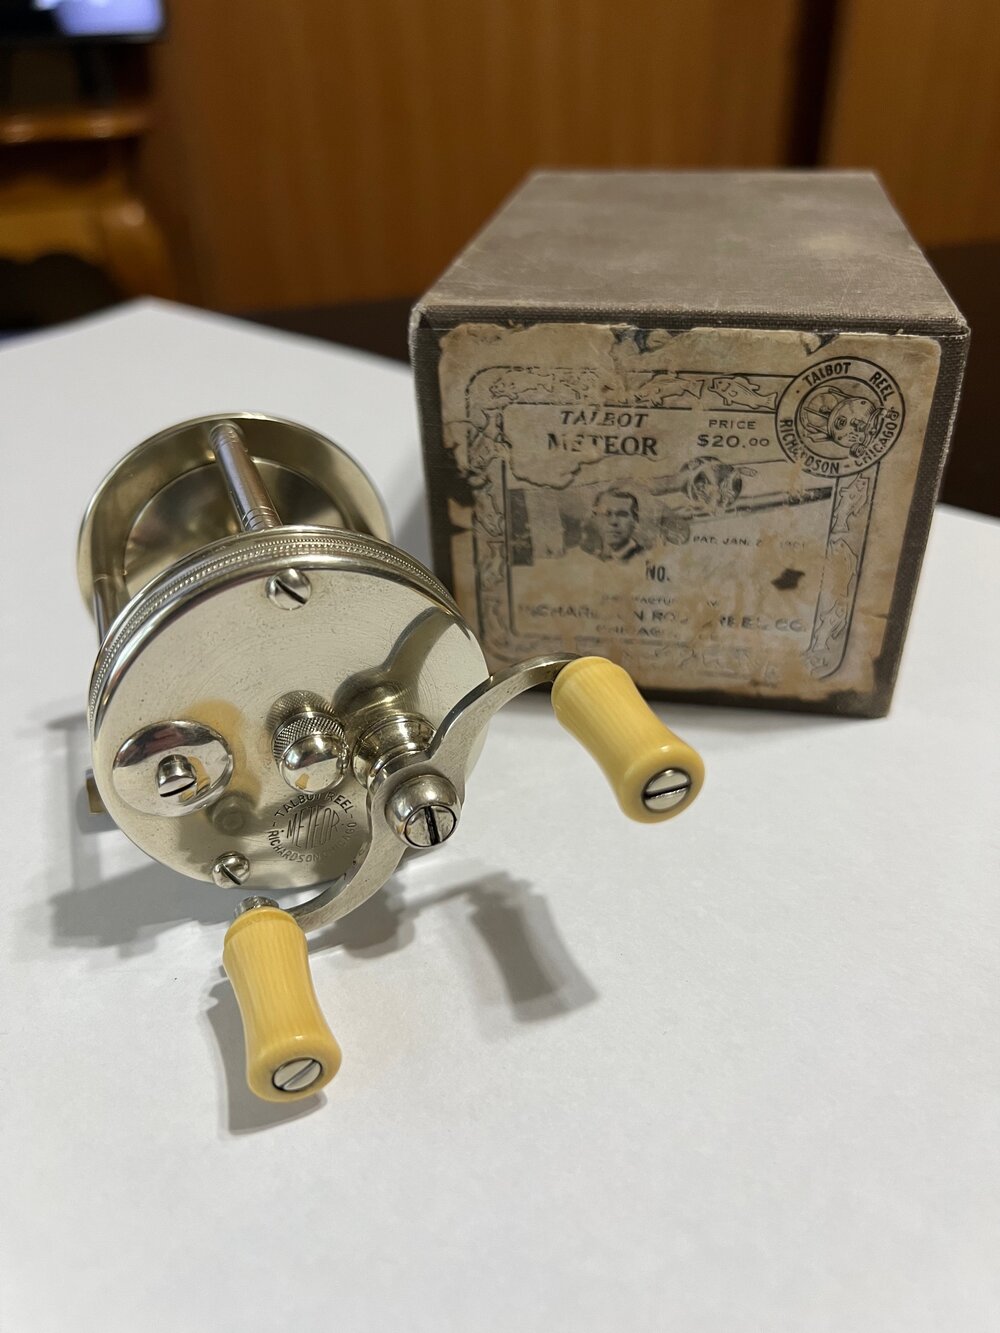 Talbot Reel Co. METEOR with Original Rare Matching Serial Numbered #5113  Picture Box Richardson, Chicago - Circa- 1920 — VINTAGE FISHING REELS